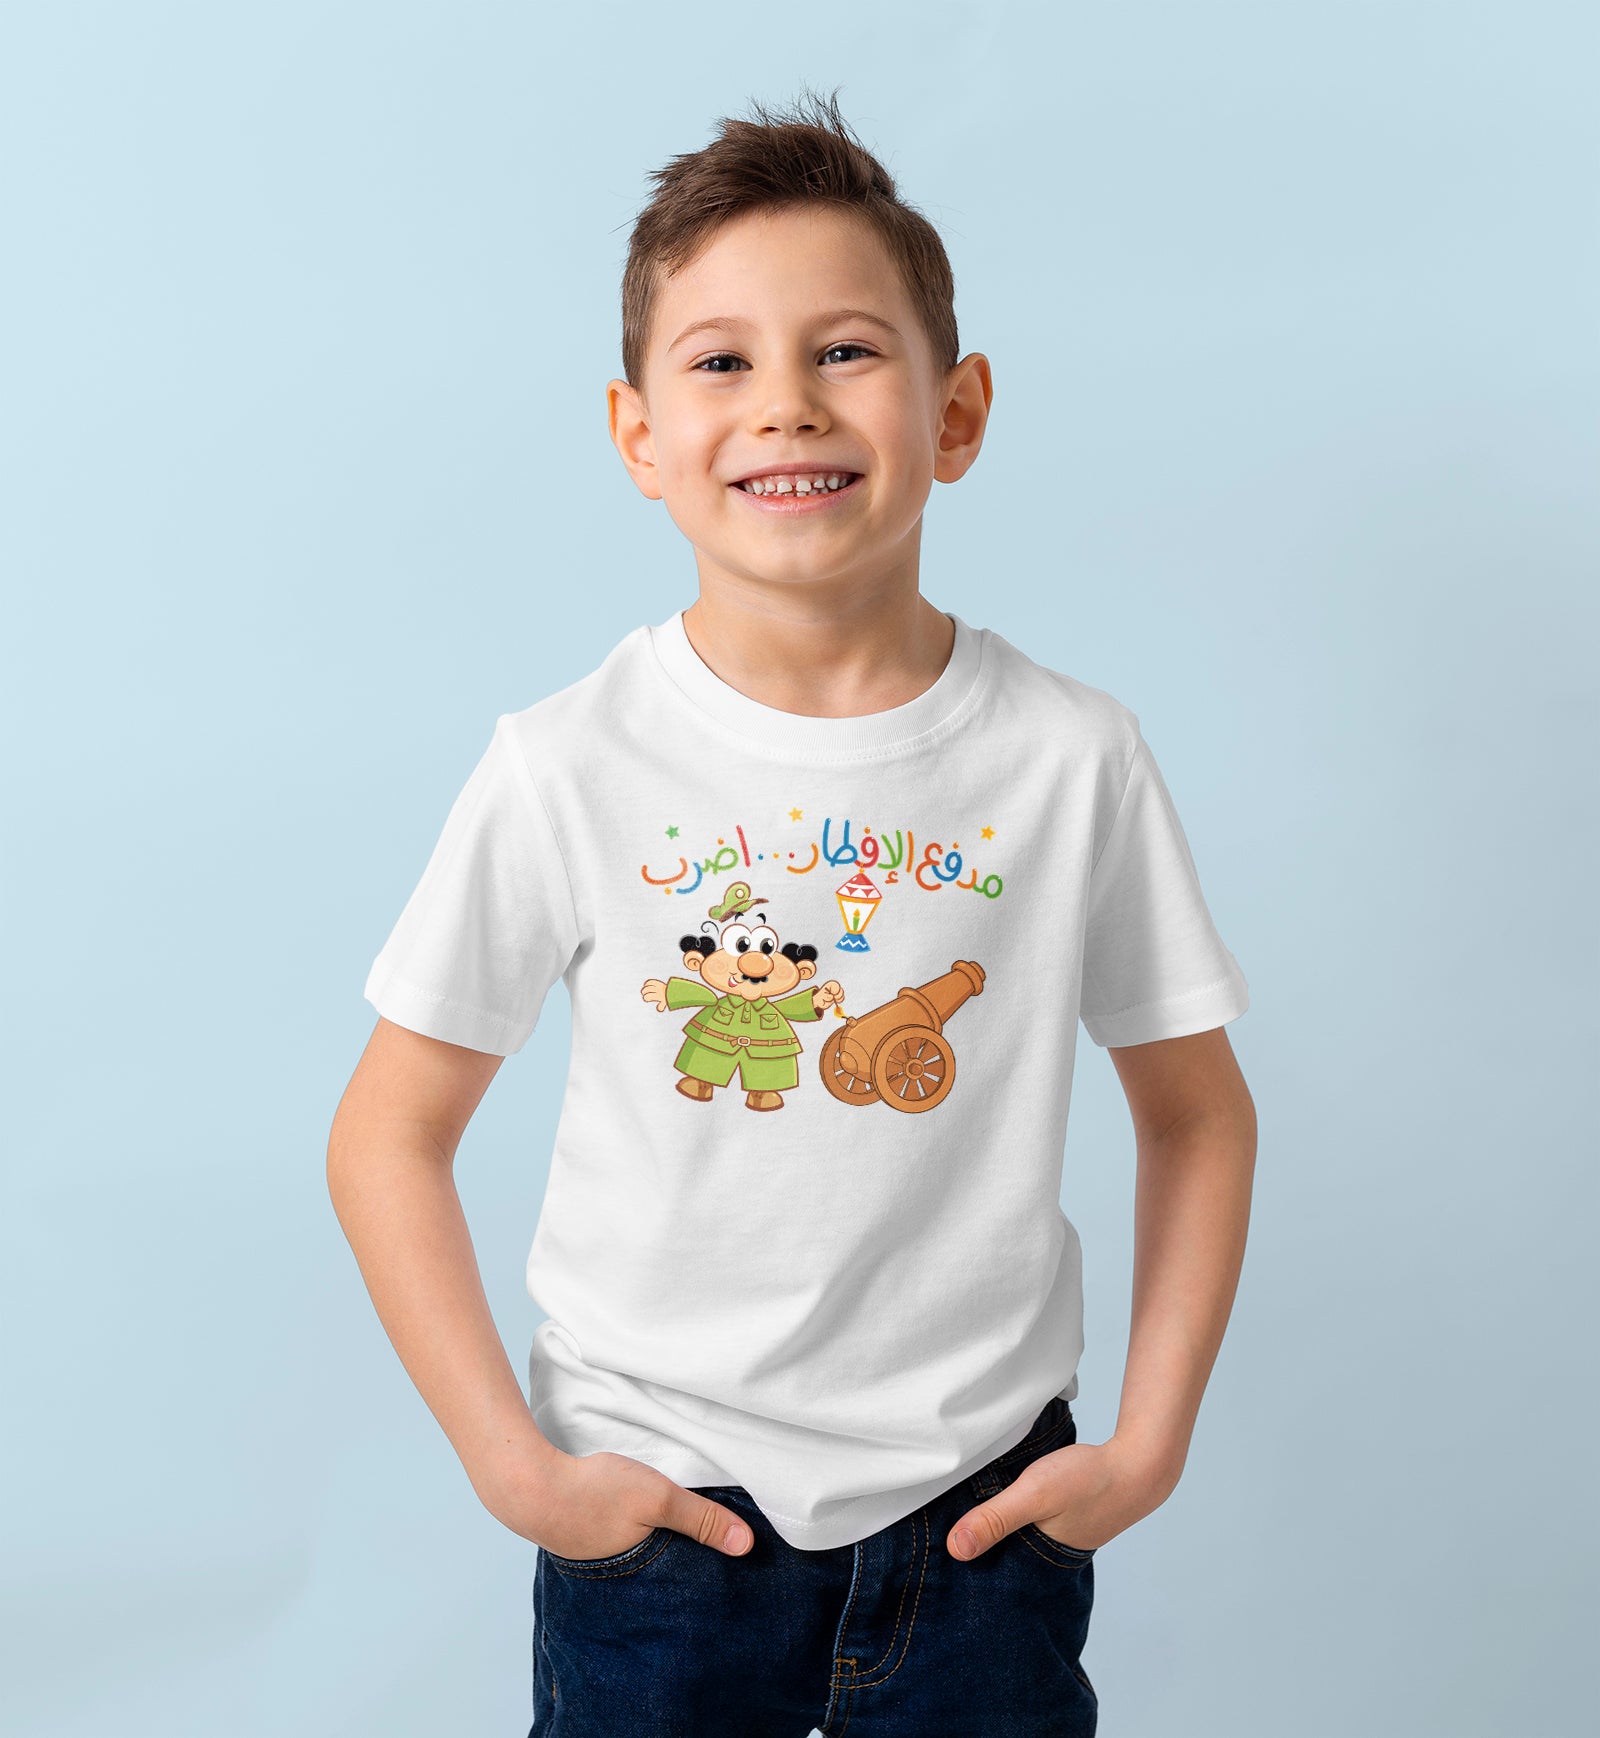 T-shirt for Kids (Iftar Cannon, Strike!)